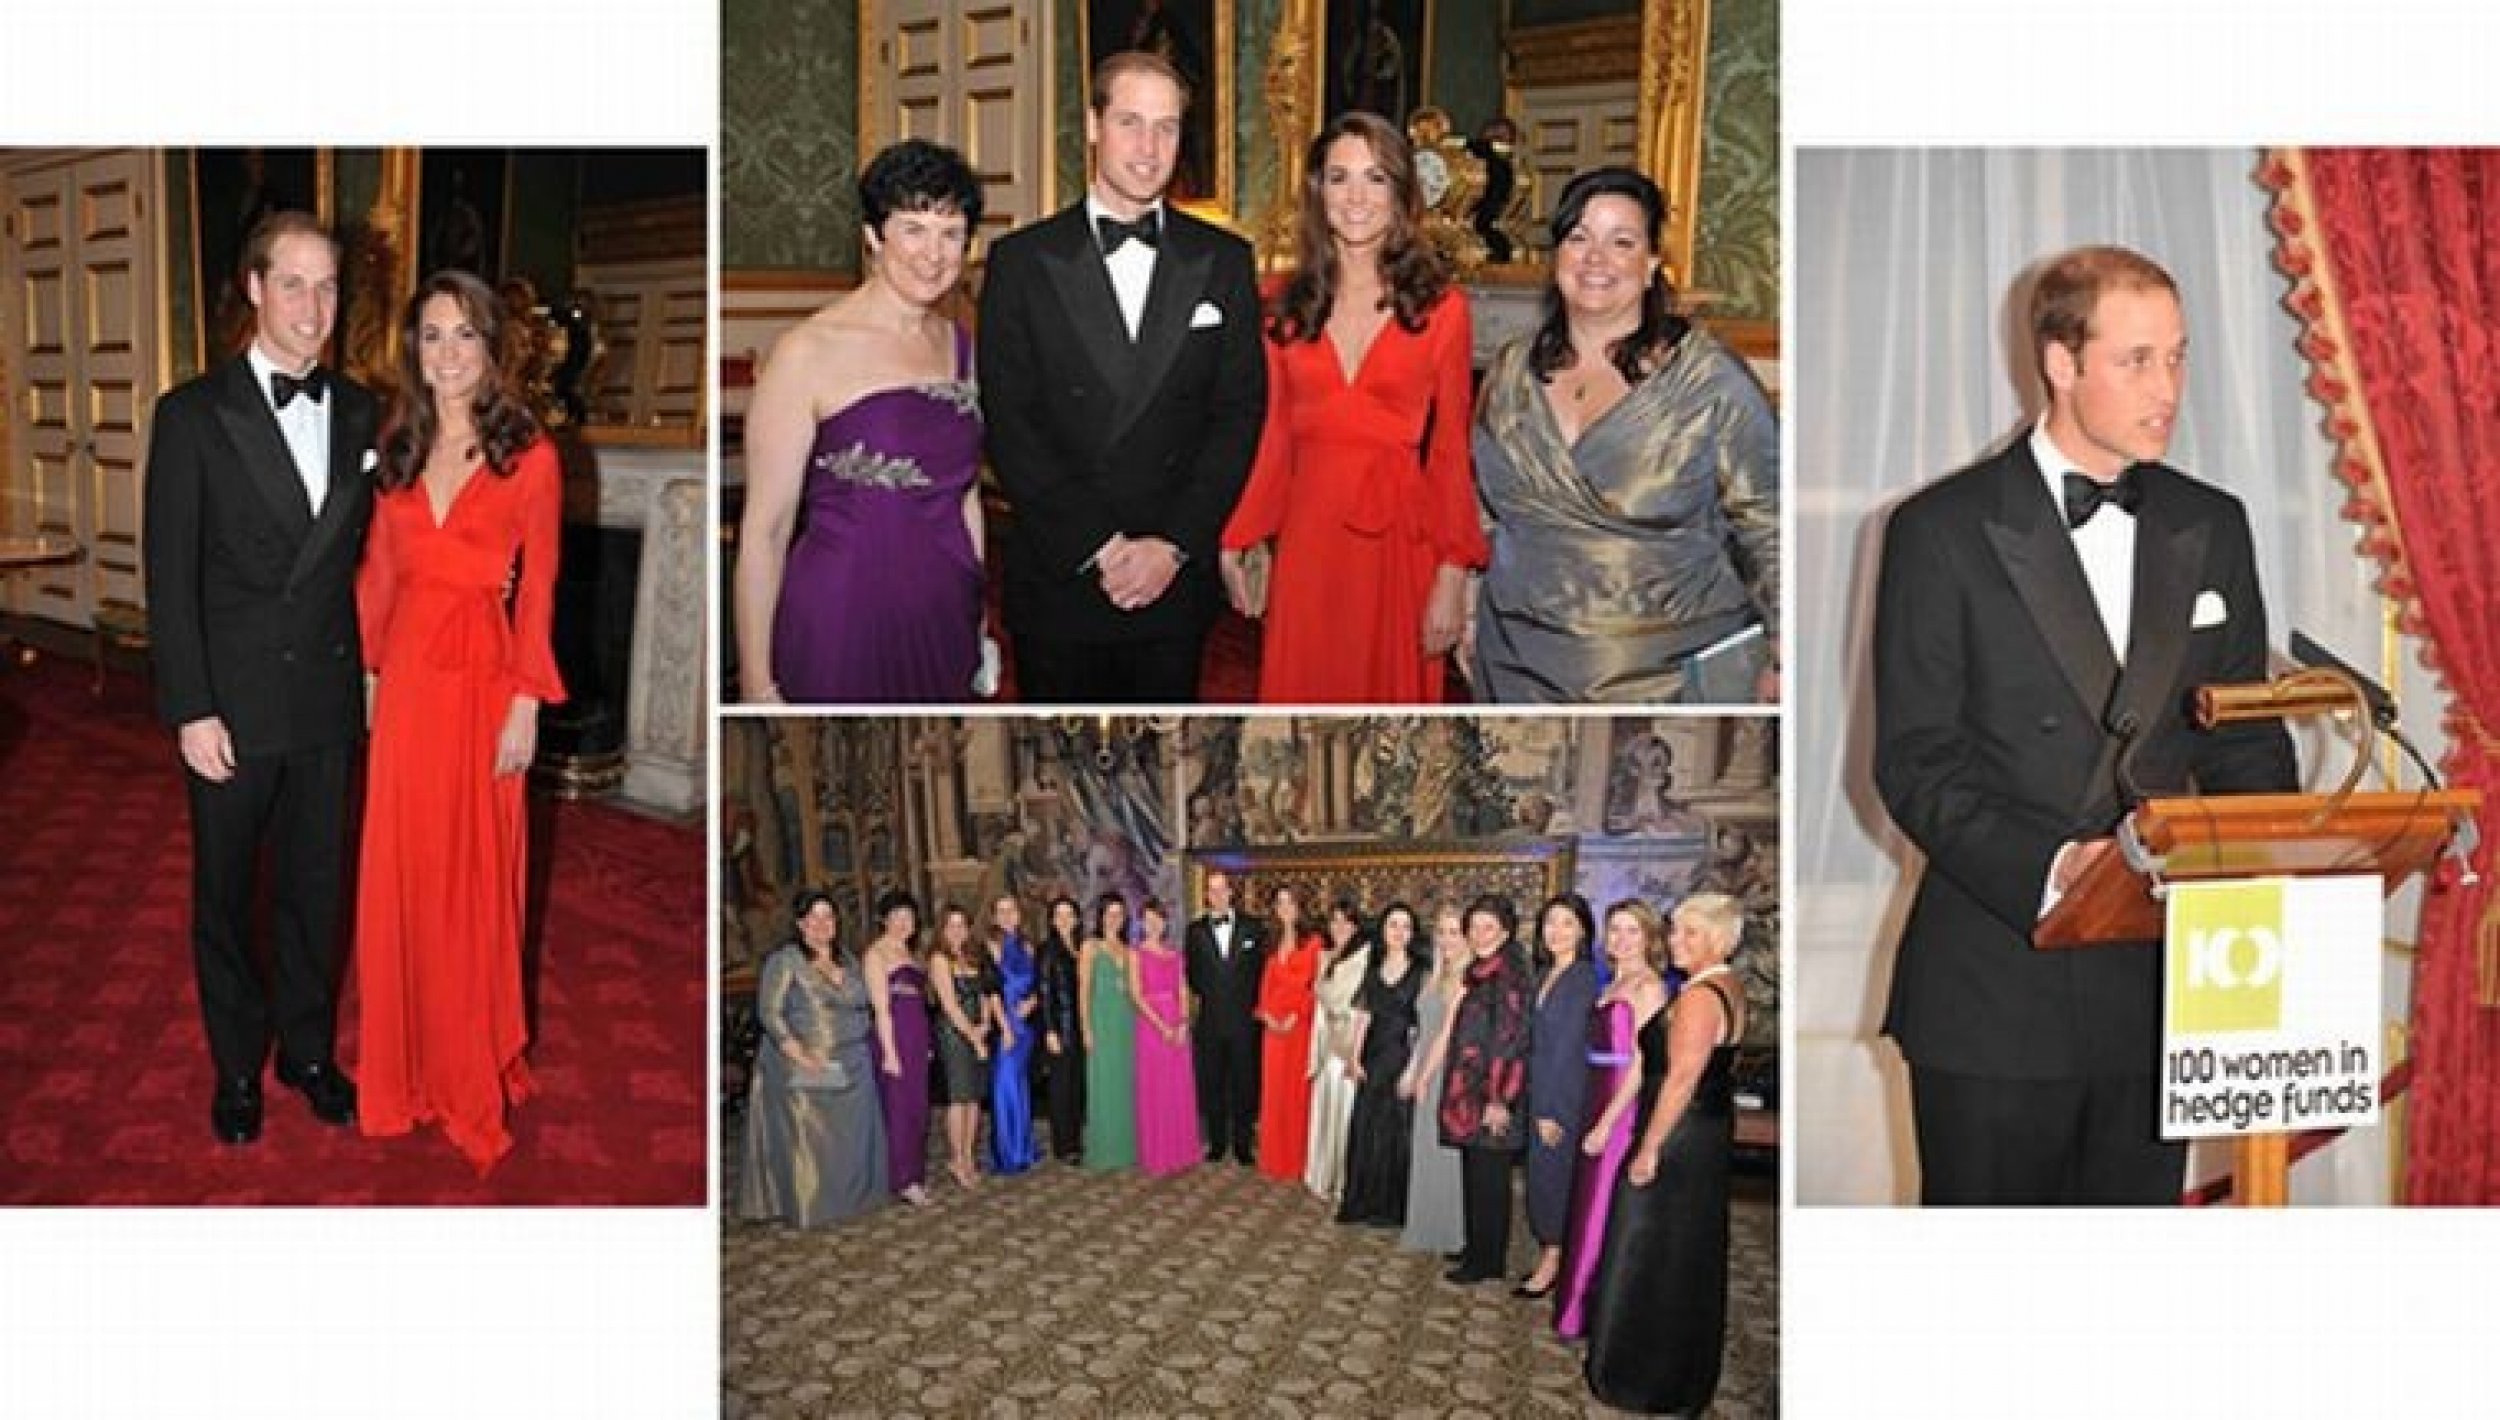 Dressed in Red Catherine Middleton Glamorizes Charity Event